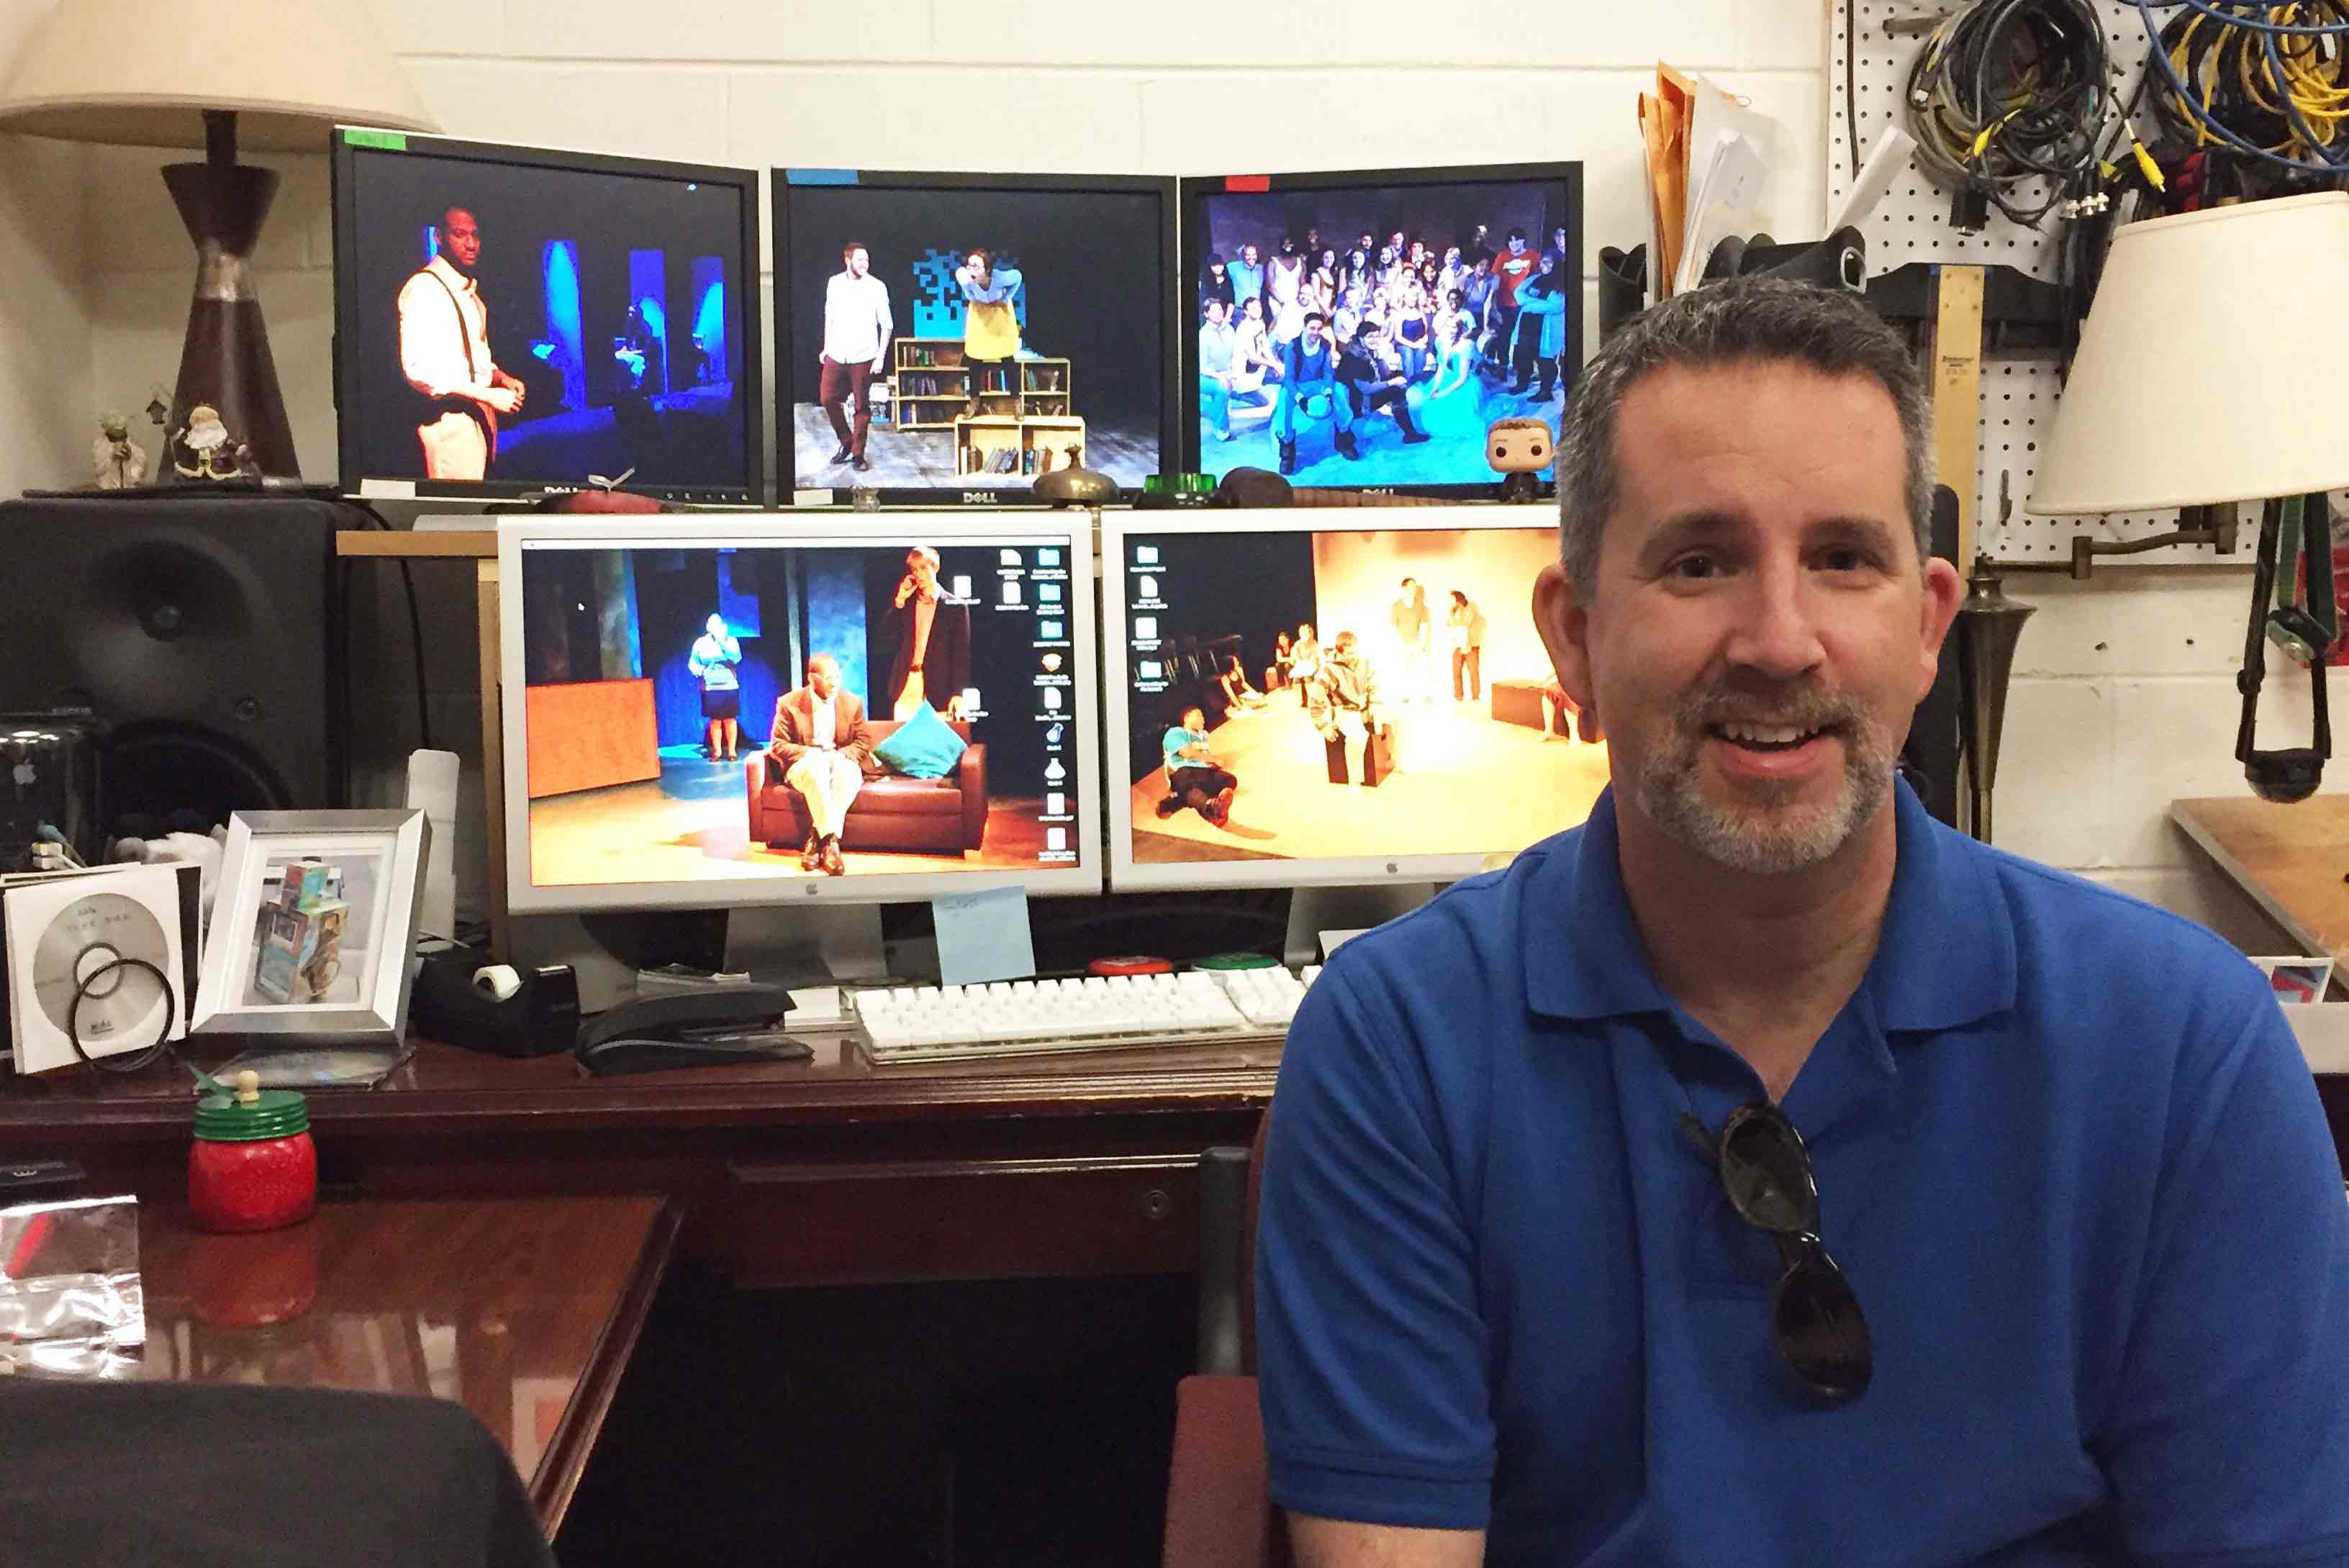 Assistant Professor Tim Gallagher enjoys working with students in all aspects of theatre.